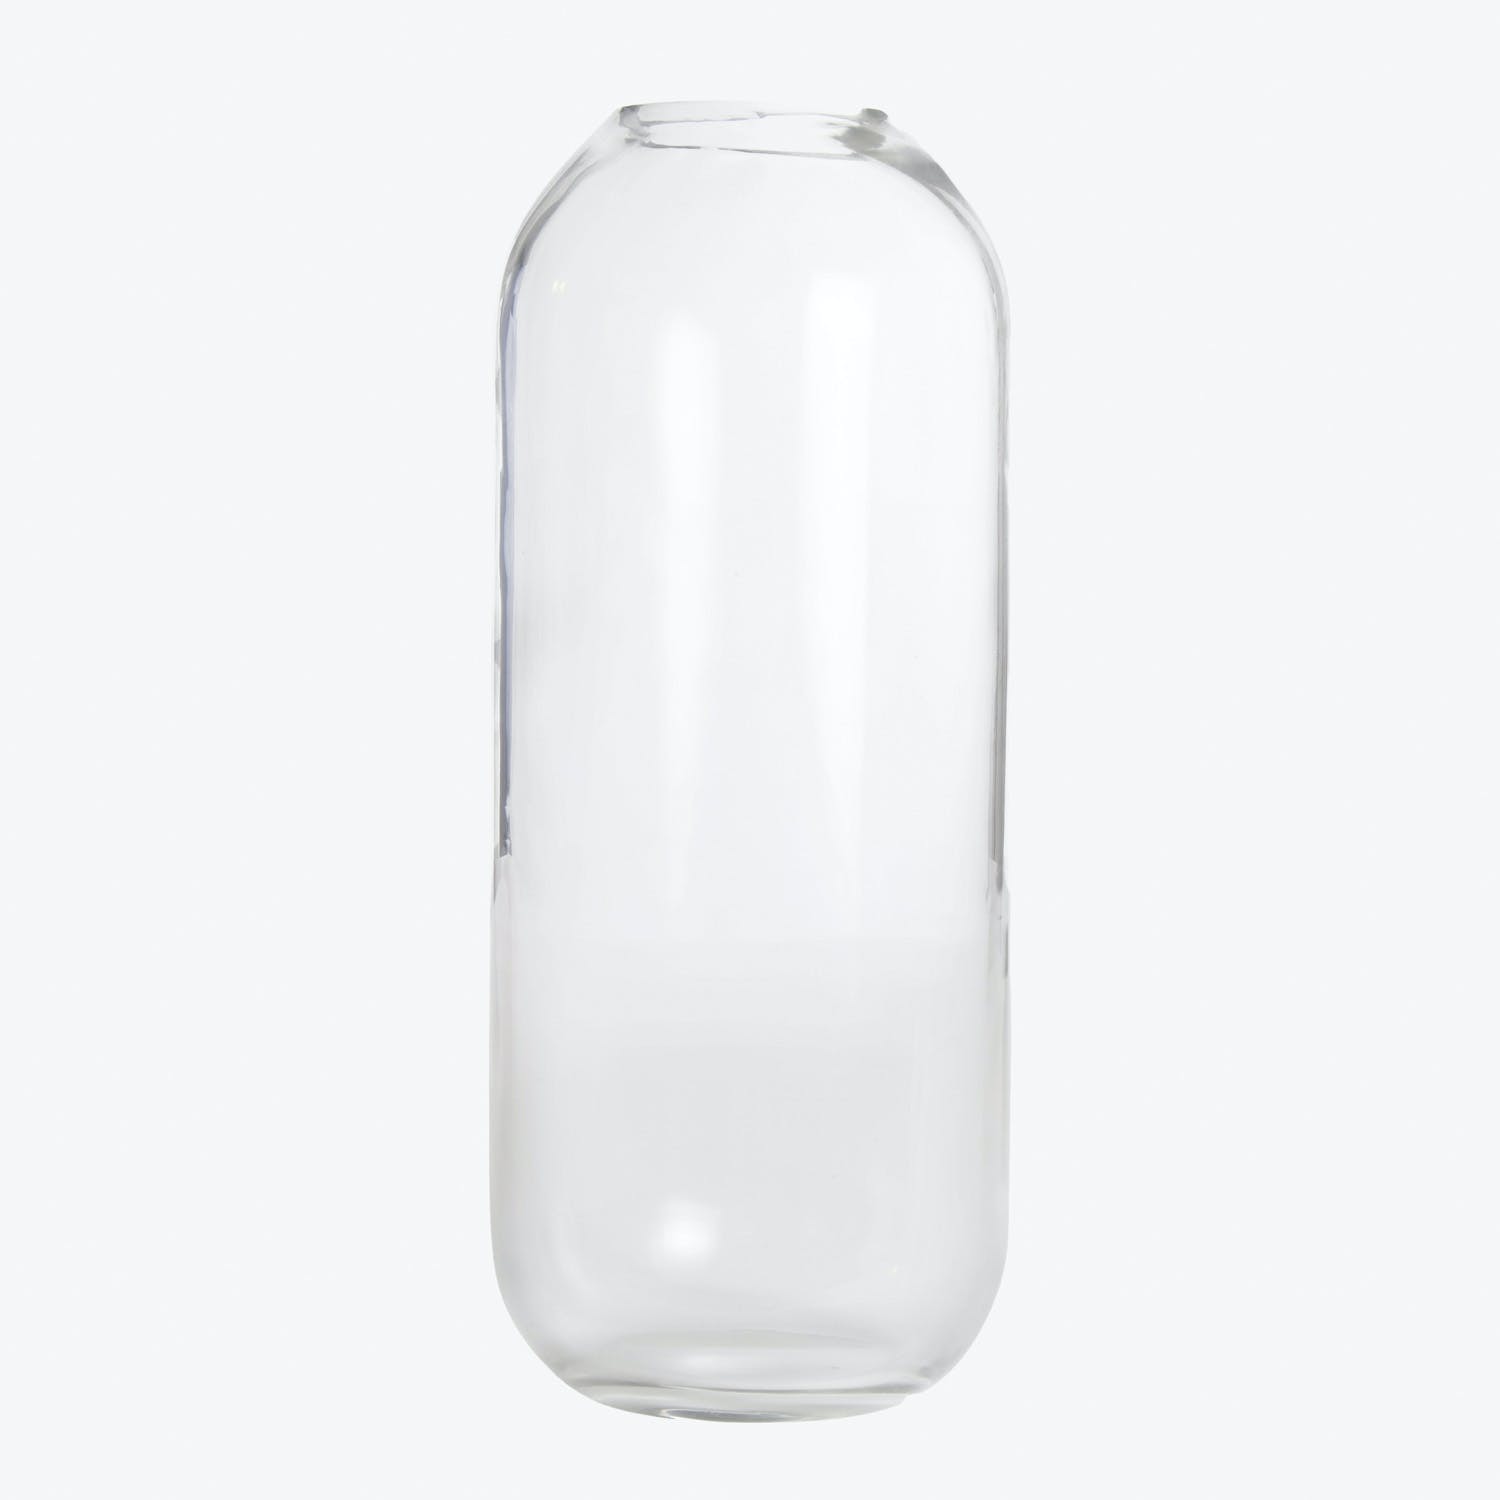 Empty clear glass bottle with smooth surfaces and cylindrical shape.